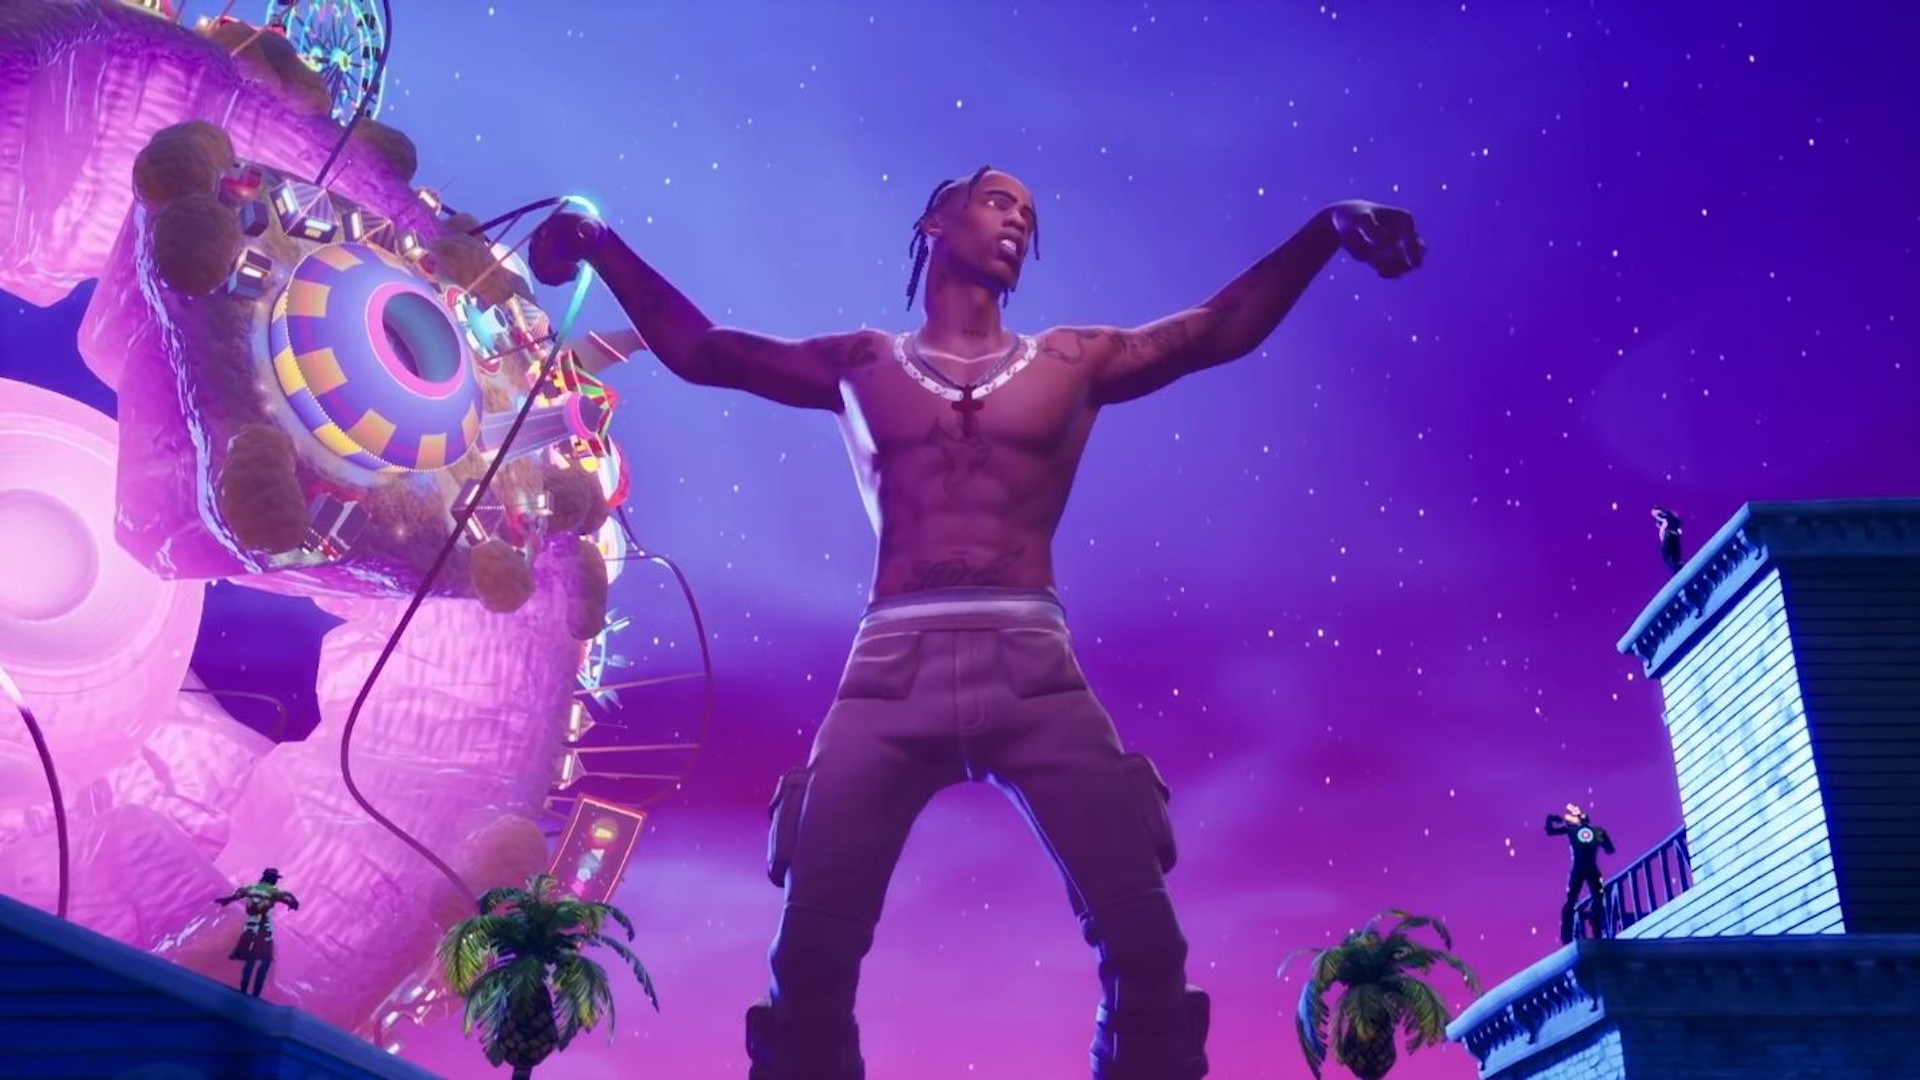 What does Travis Scott's Fortnite event reveal about the future of entertainment?